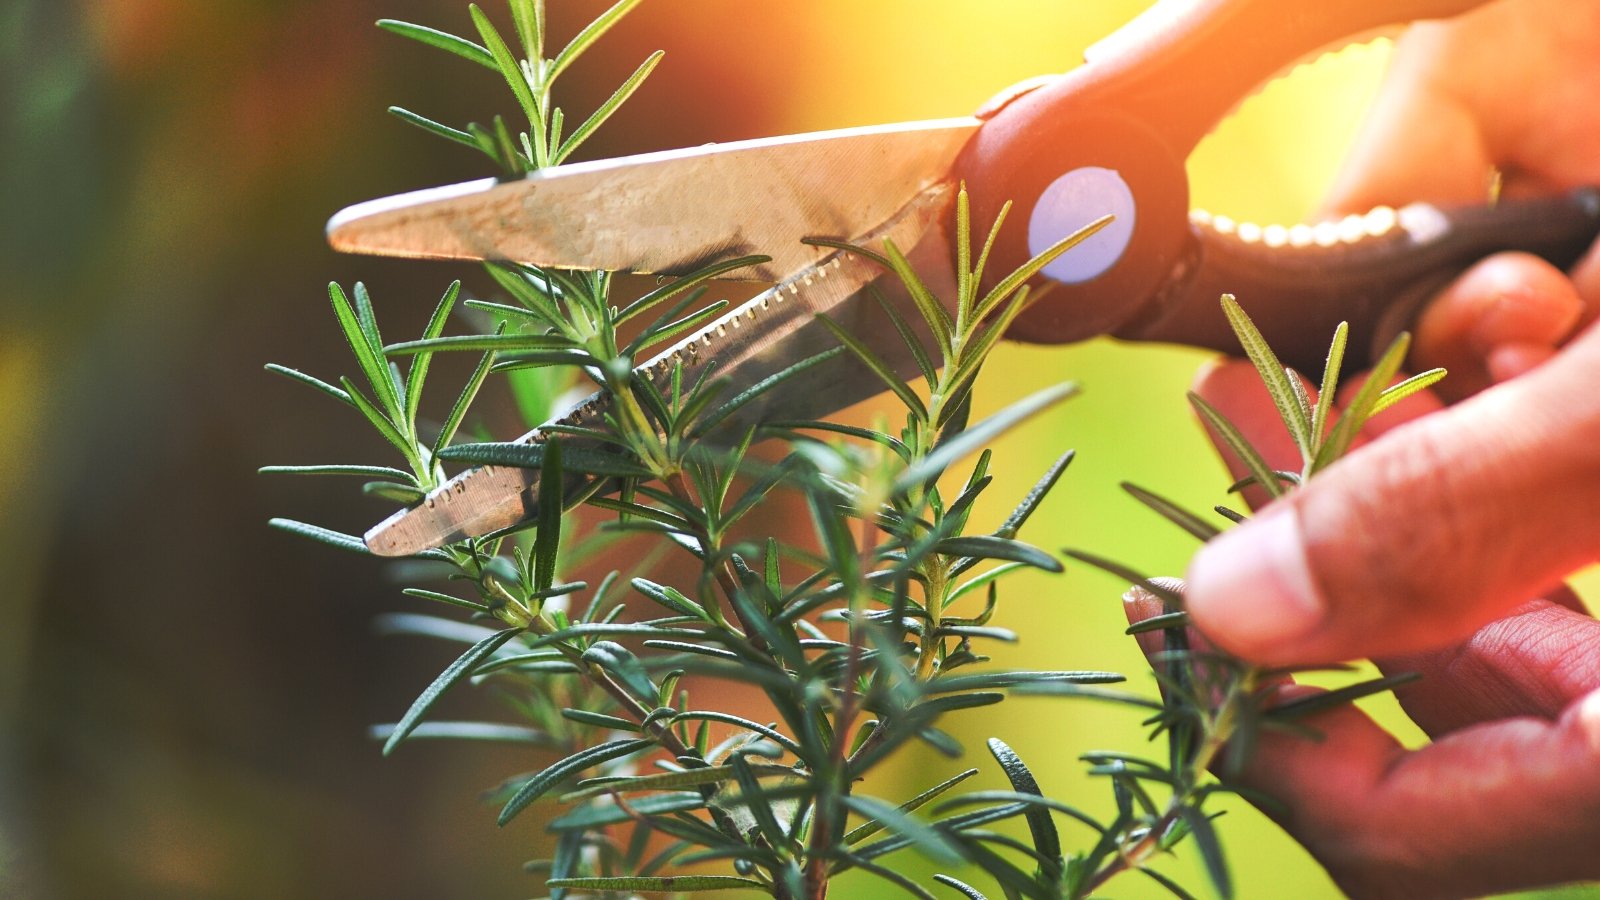 Gardener pruning rosemary plant with black gardening shears and sunlight lighting the process